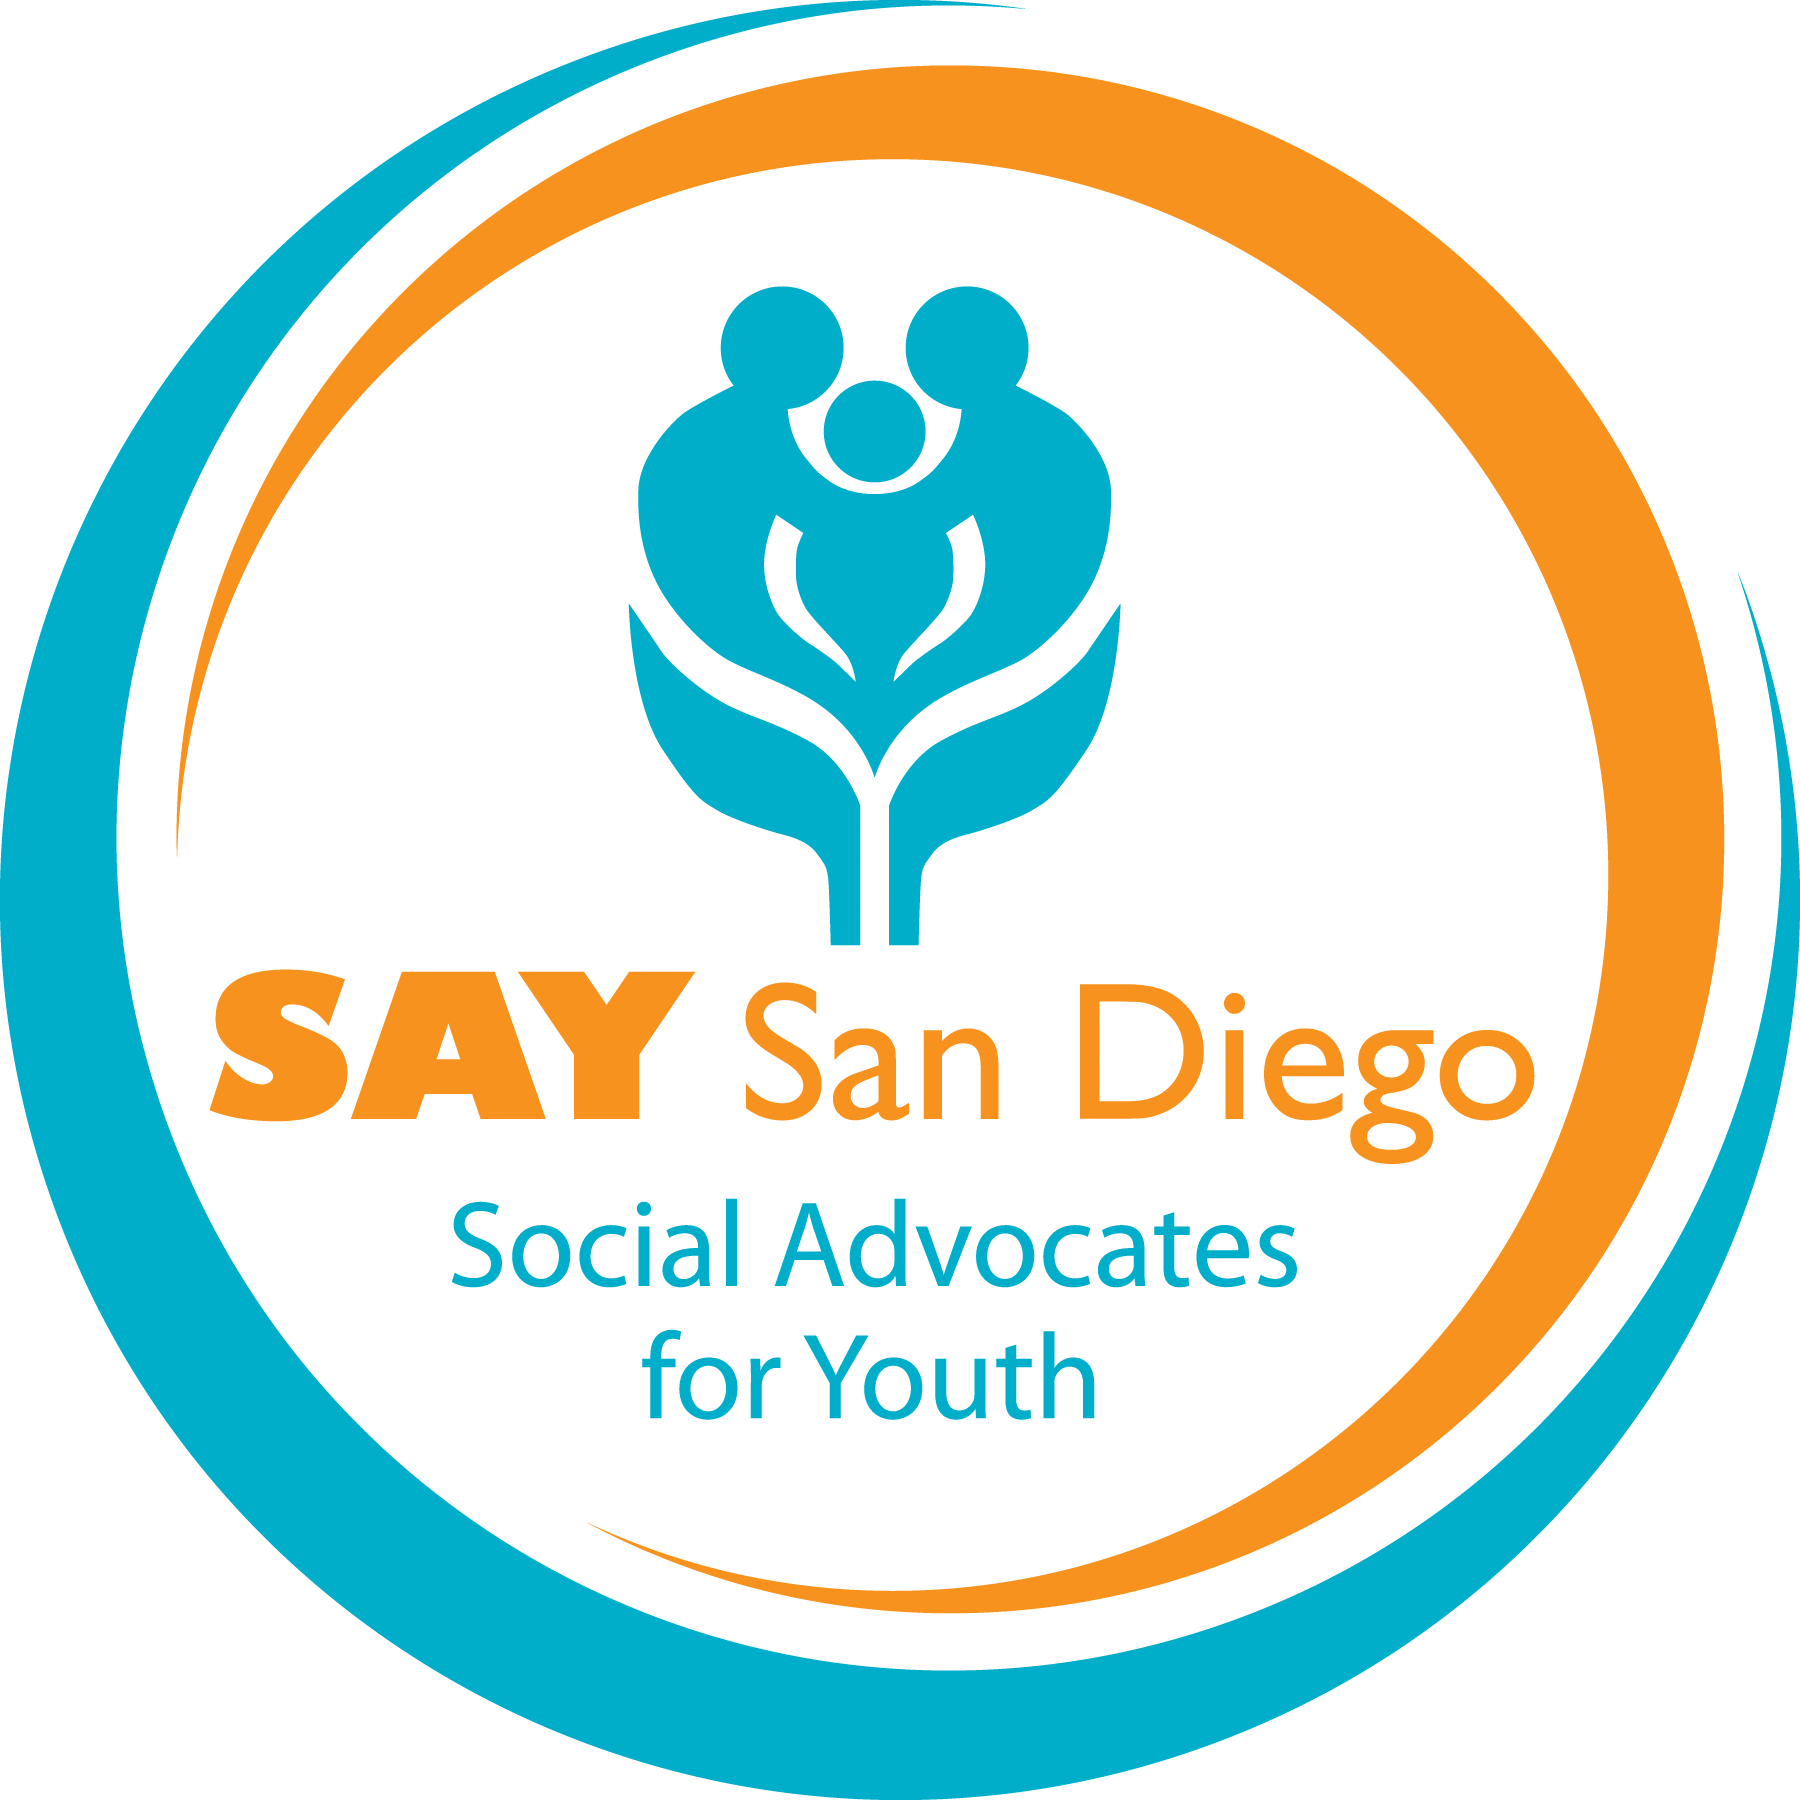 Social Advocates for Youth, San Diego